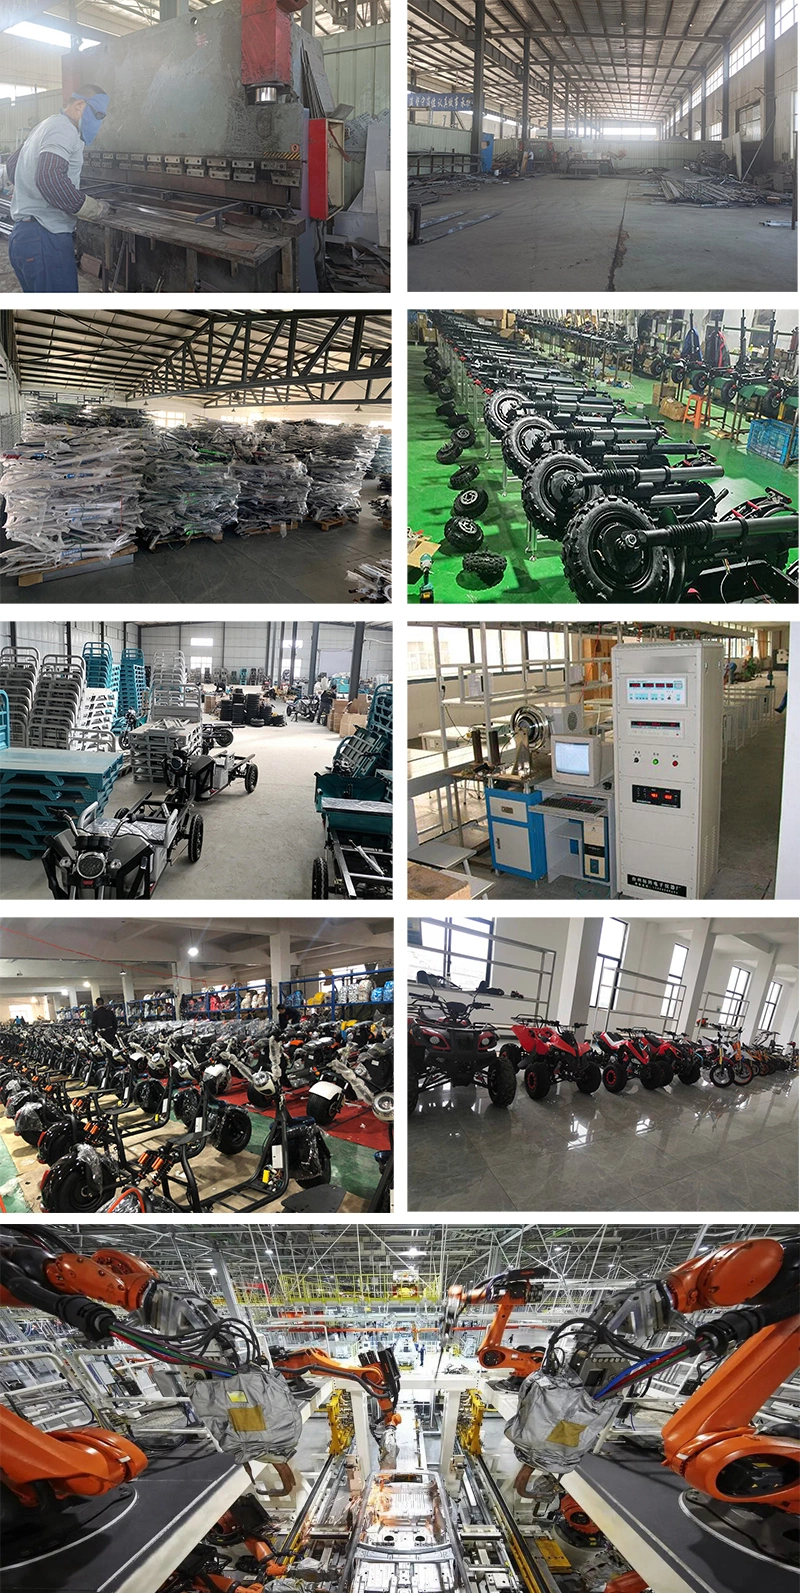 Motorcycle Kit Scooter in Wheel 4000W Electrical Woman Dubai EU Warehouse Chinese Bicycles Prices Cabling for Electric Bicycle